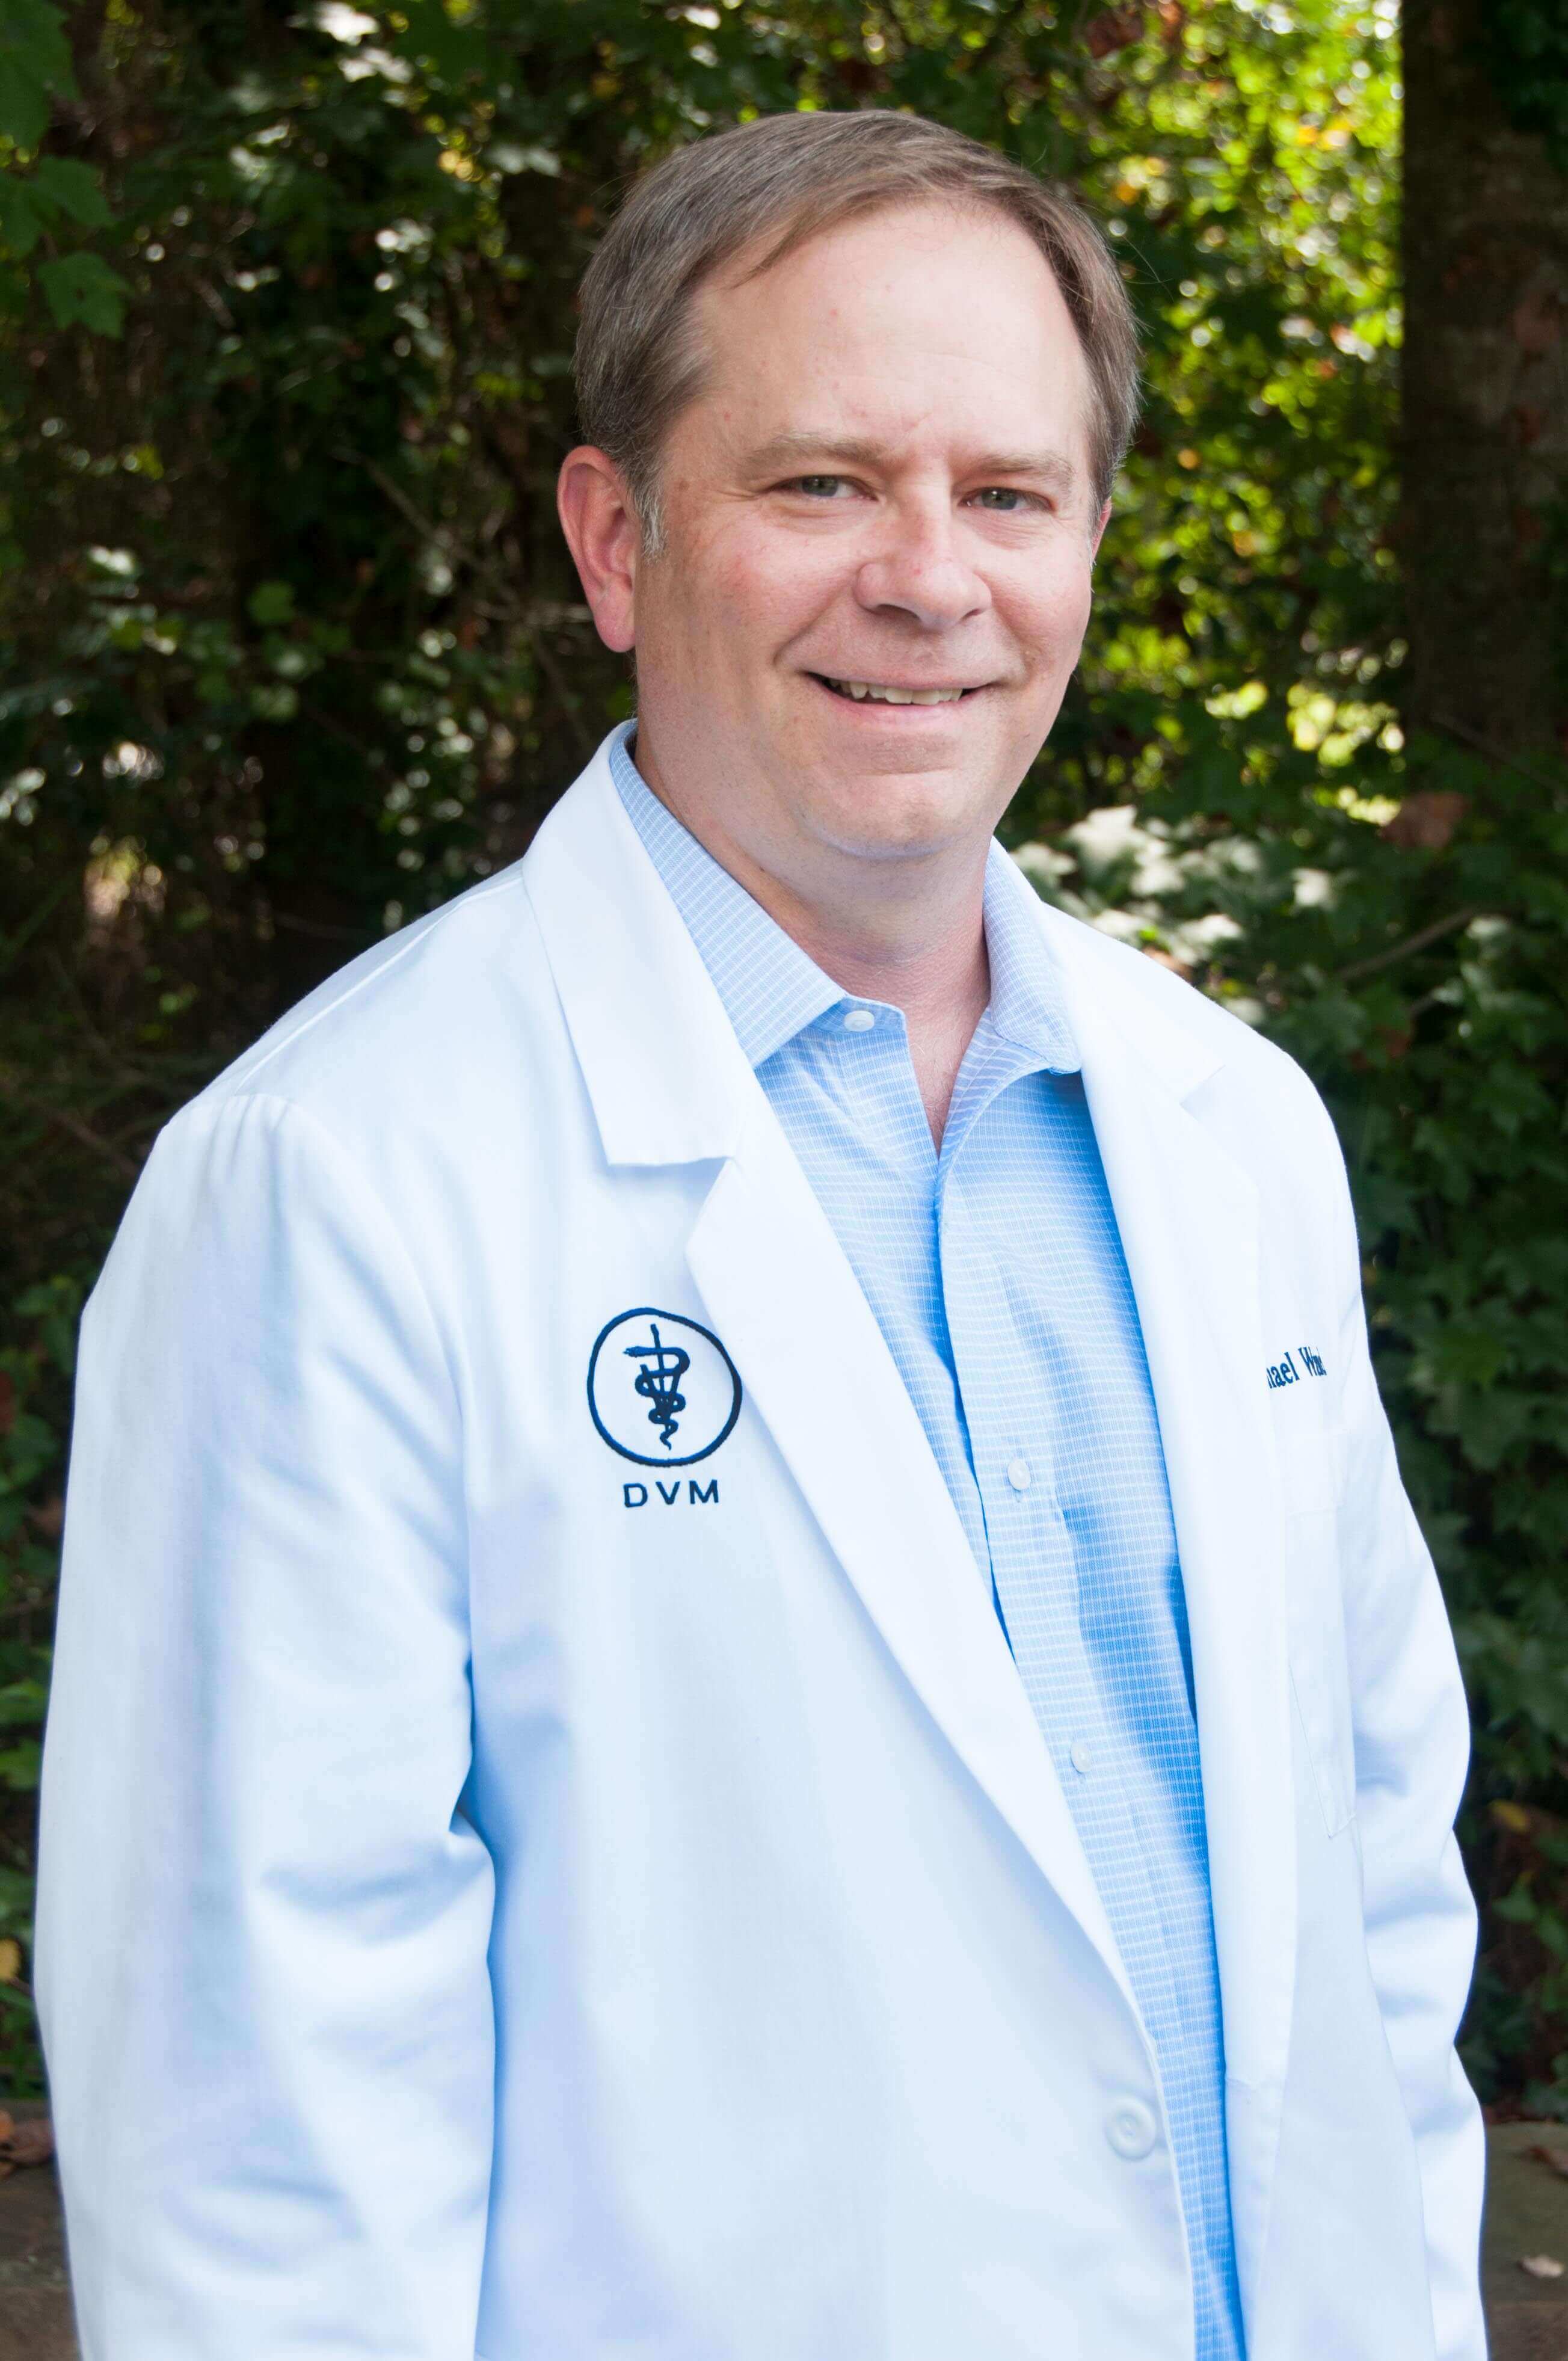 Dr. Mike Wanchick